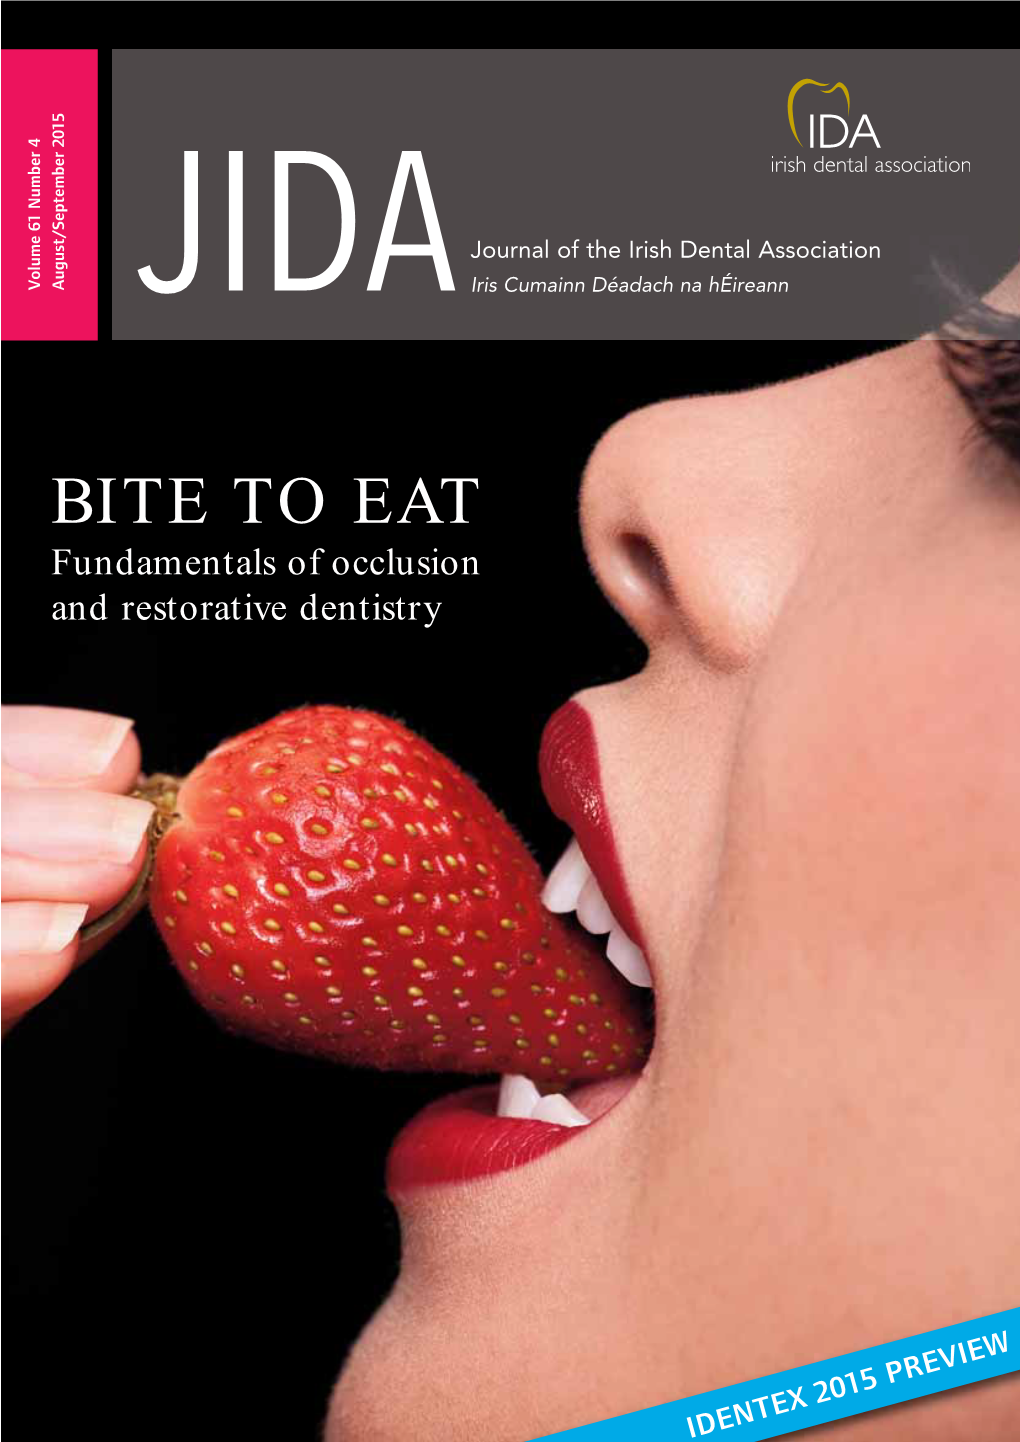 BITE to EAT Fundamentals of Occlusion and Restorative Dentistry